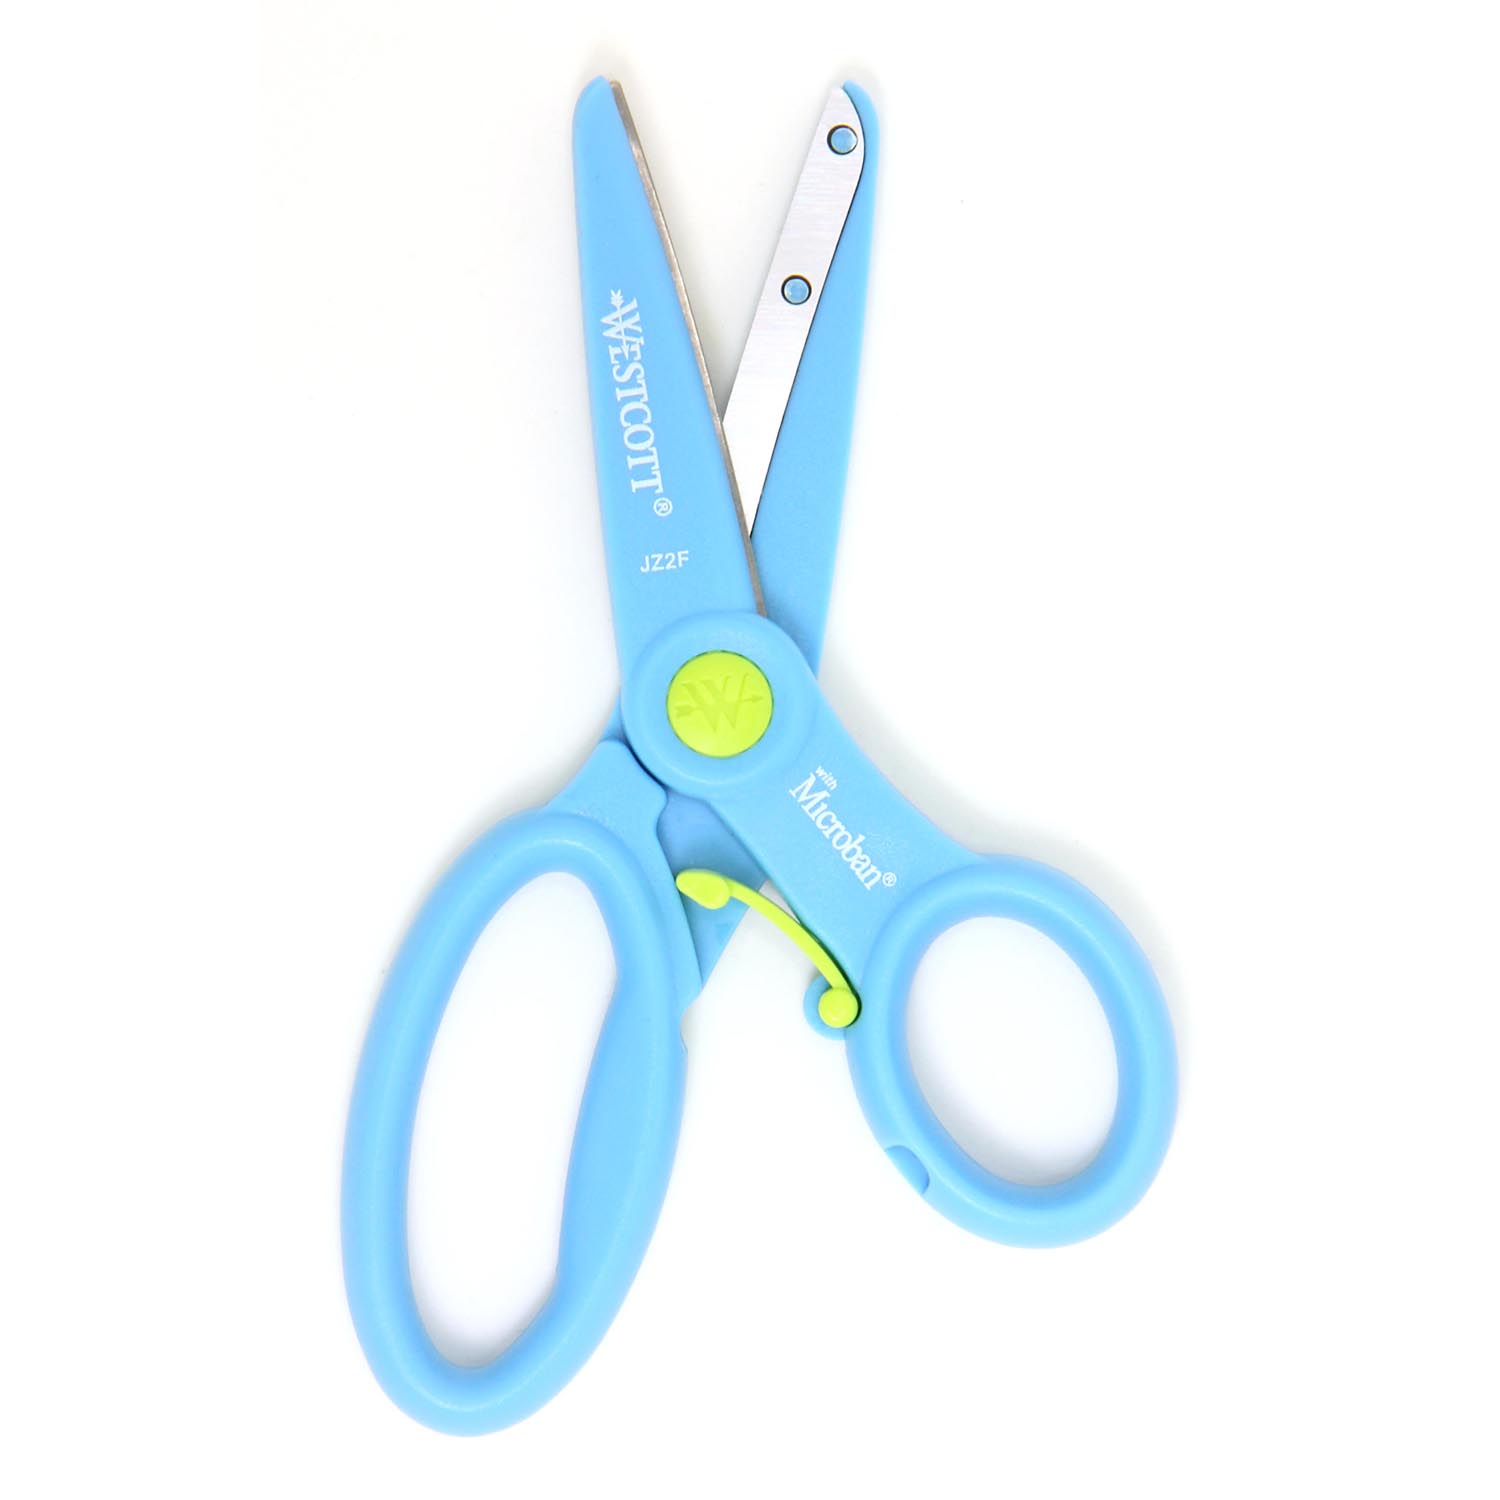 KidiCut 4.75 Spring-Assisted Plastic Safety Scissors